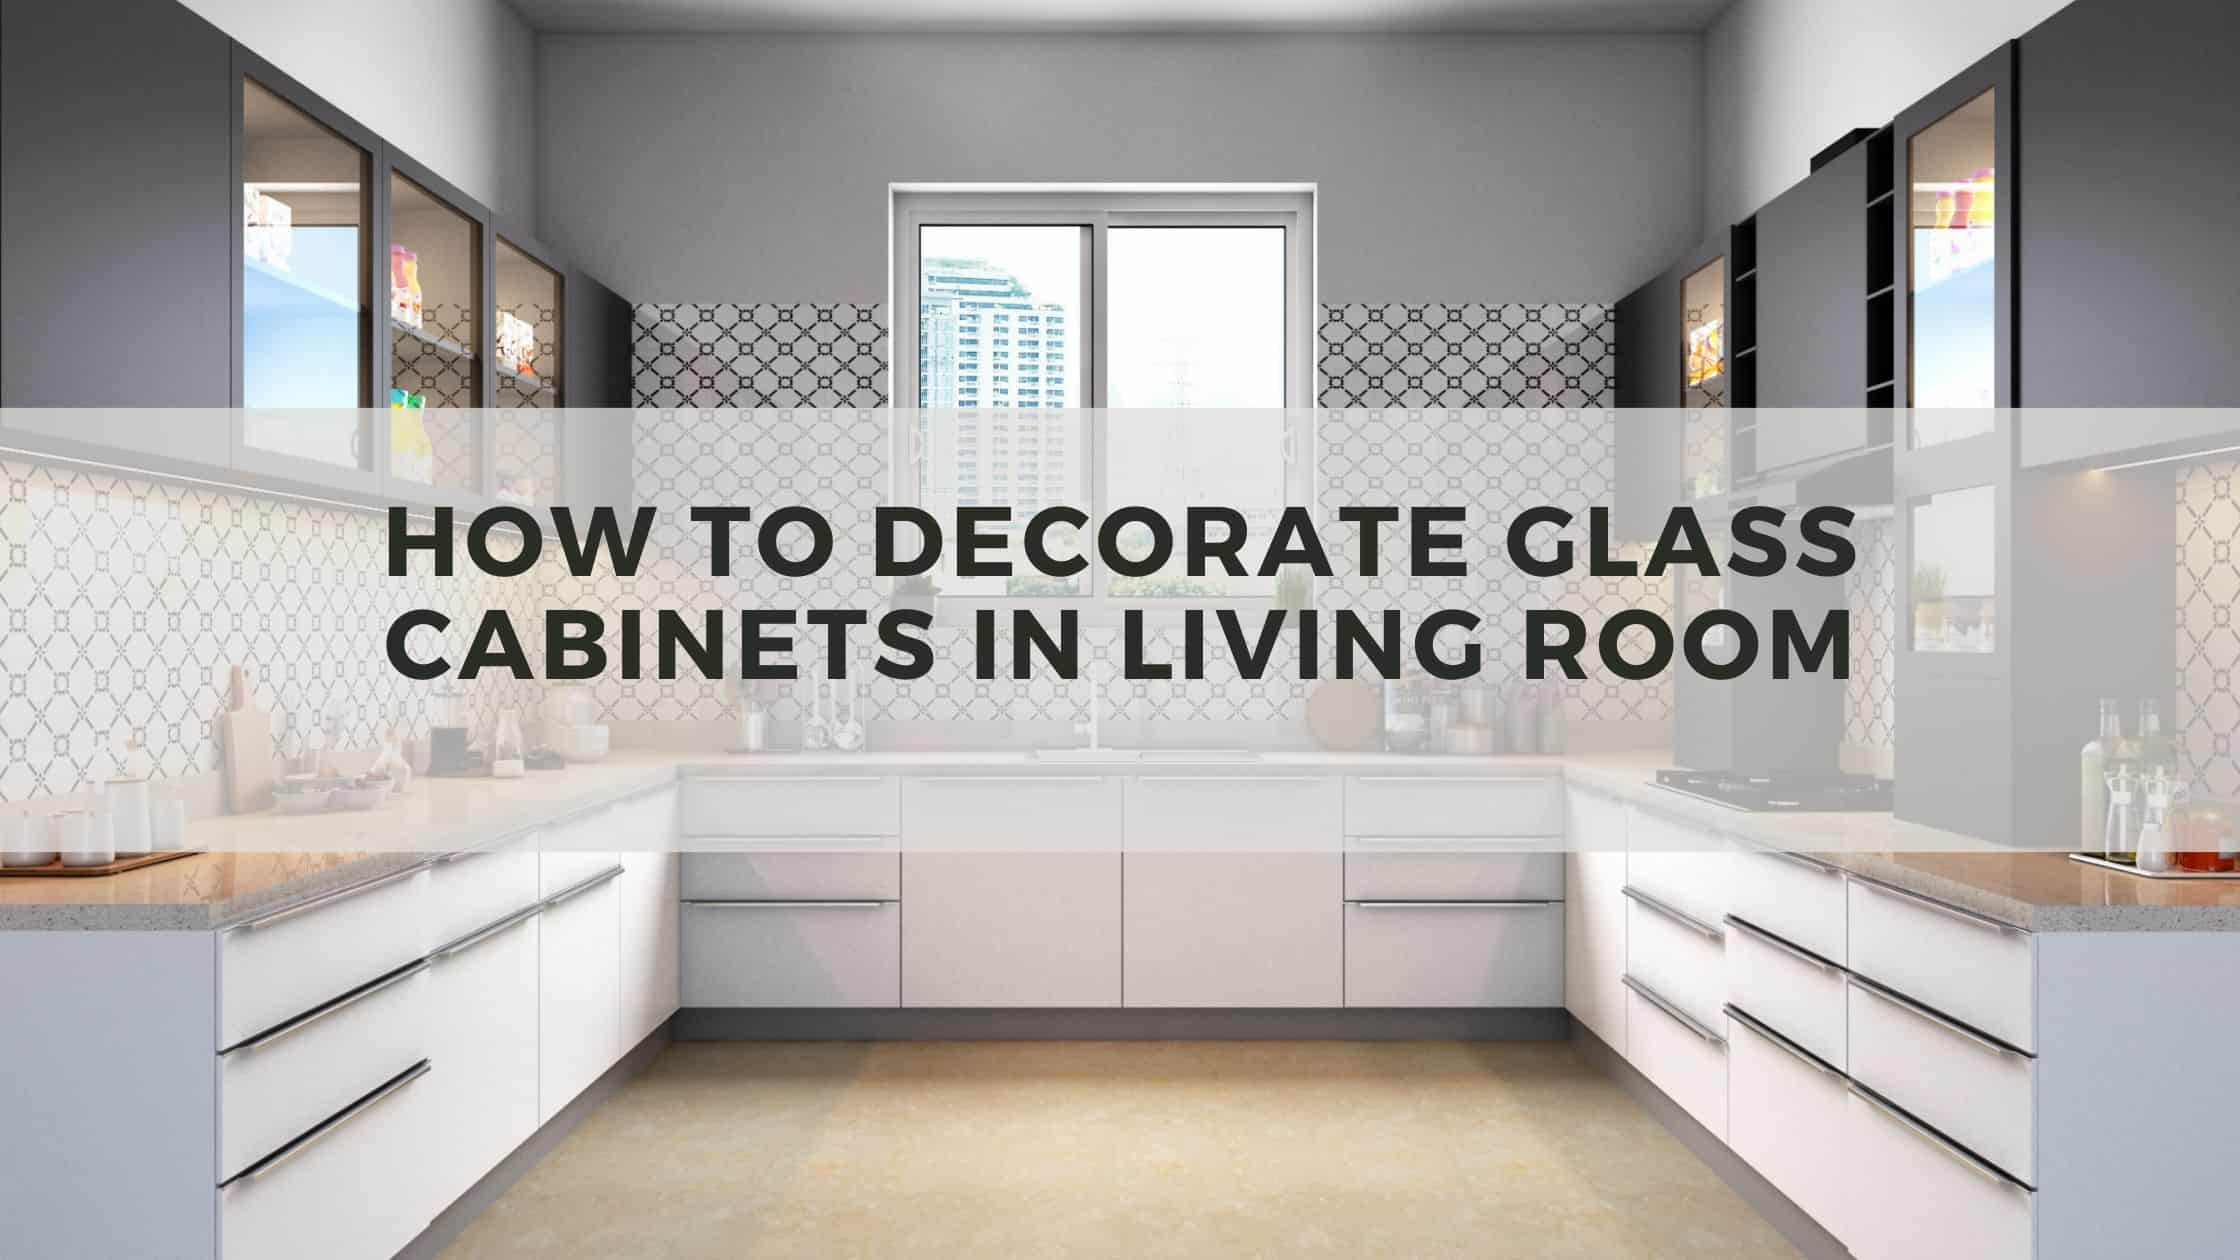 How To Decorate Glass Cabinets In Living Room